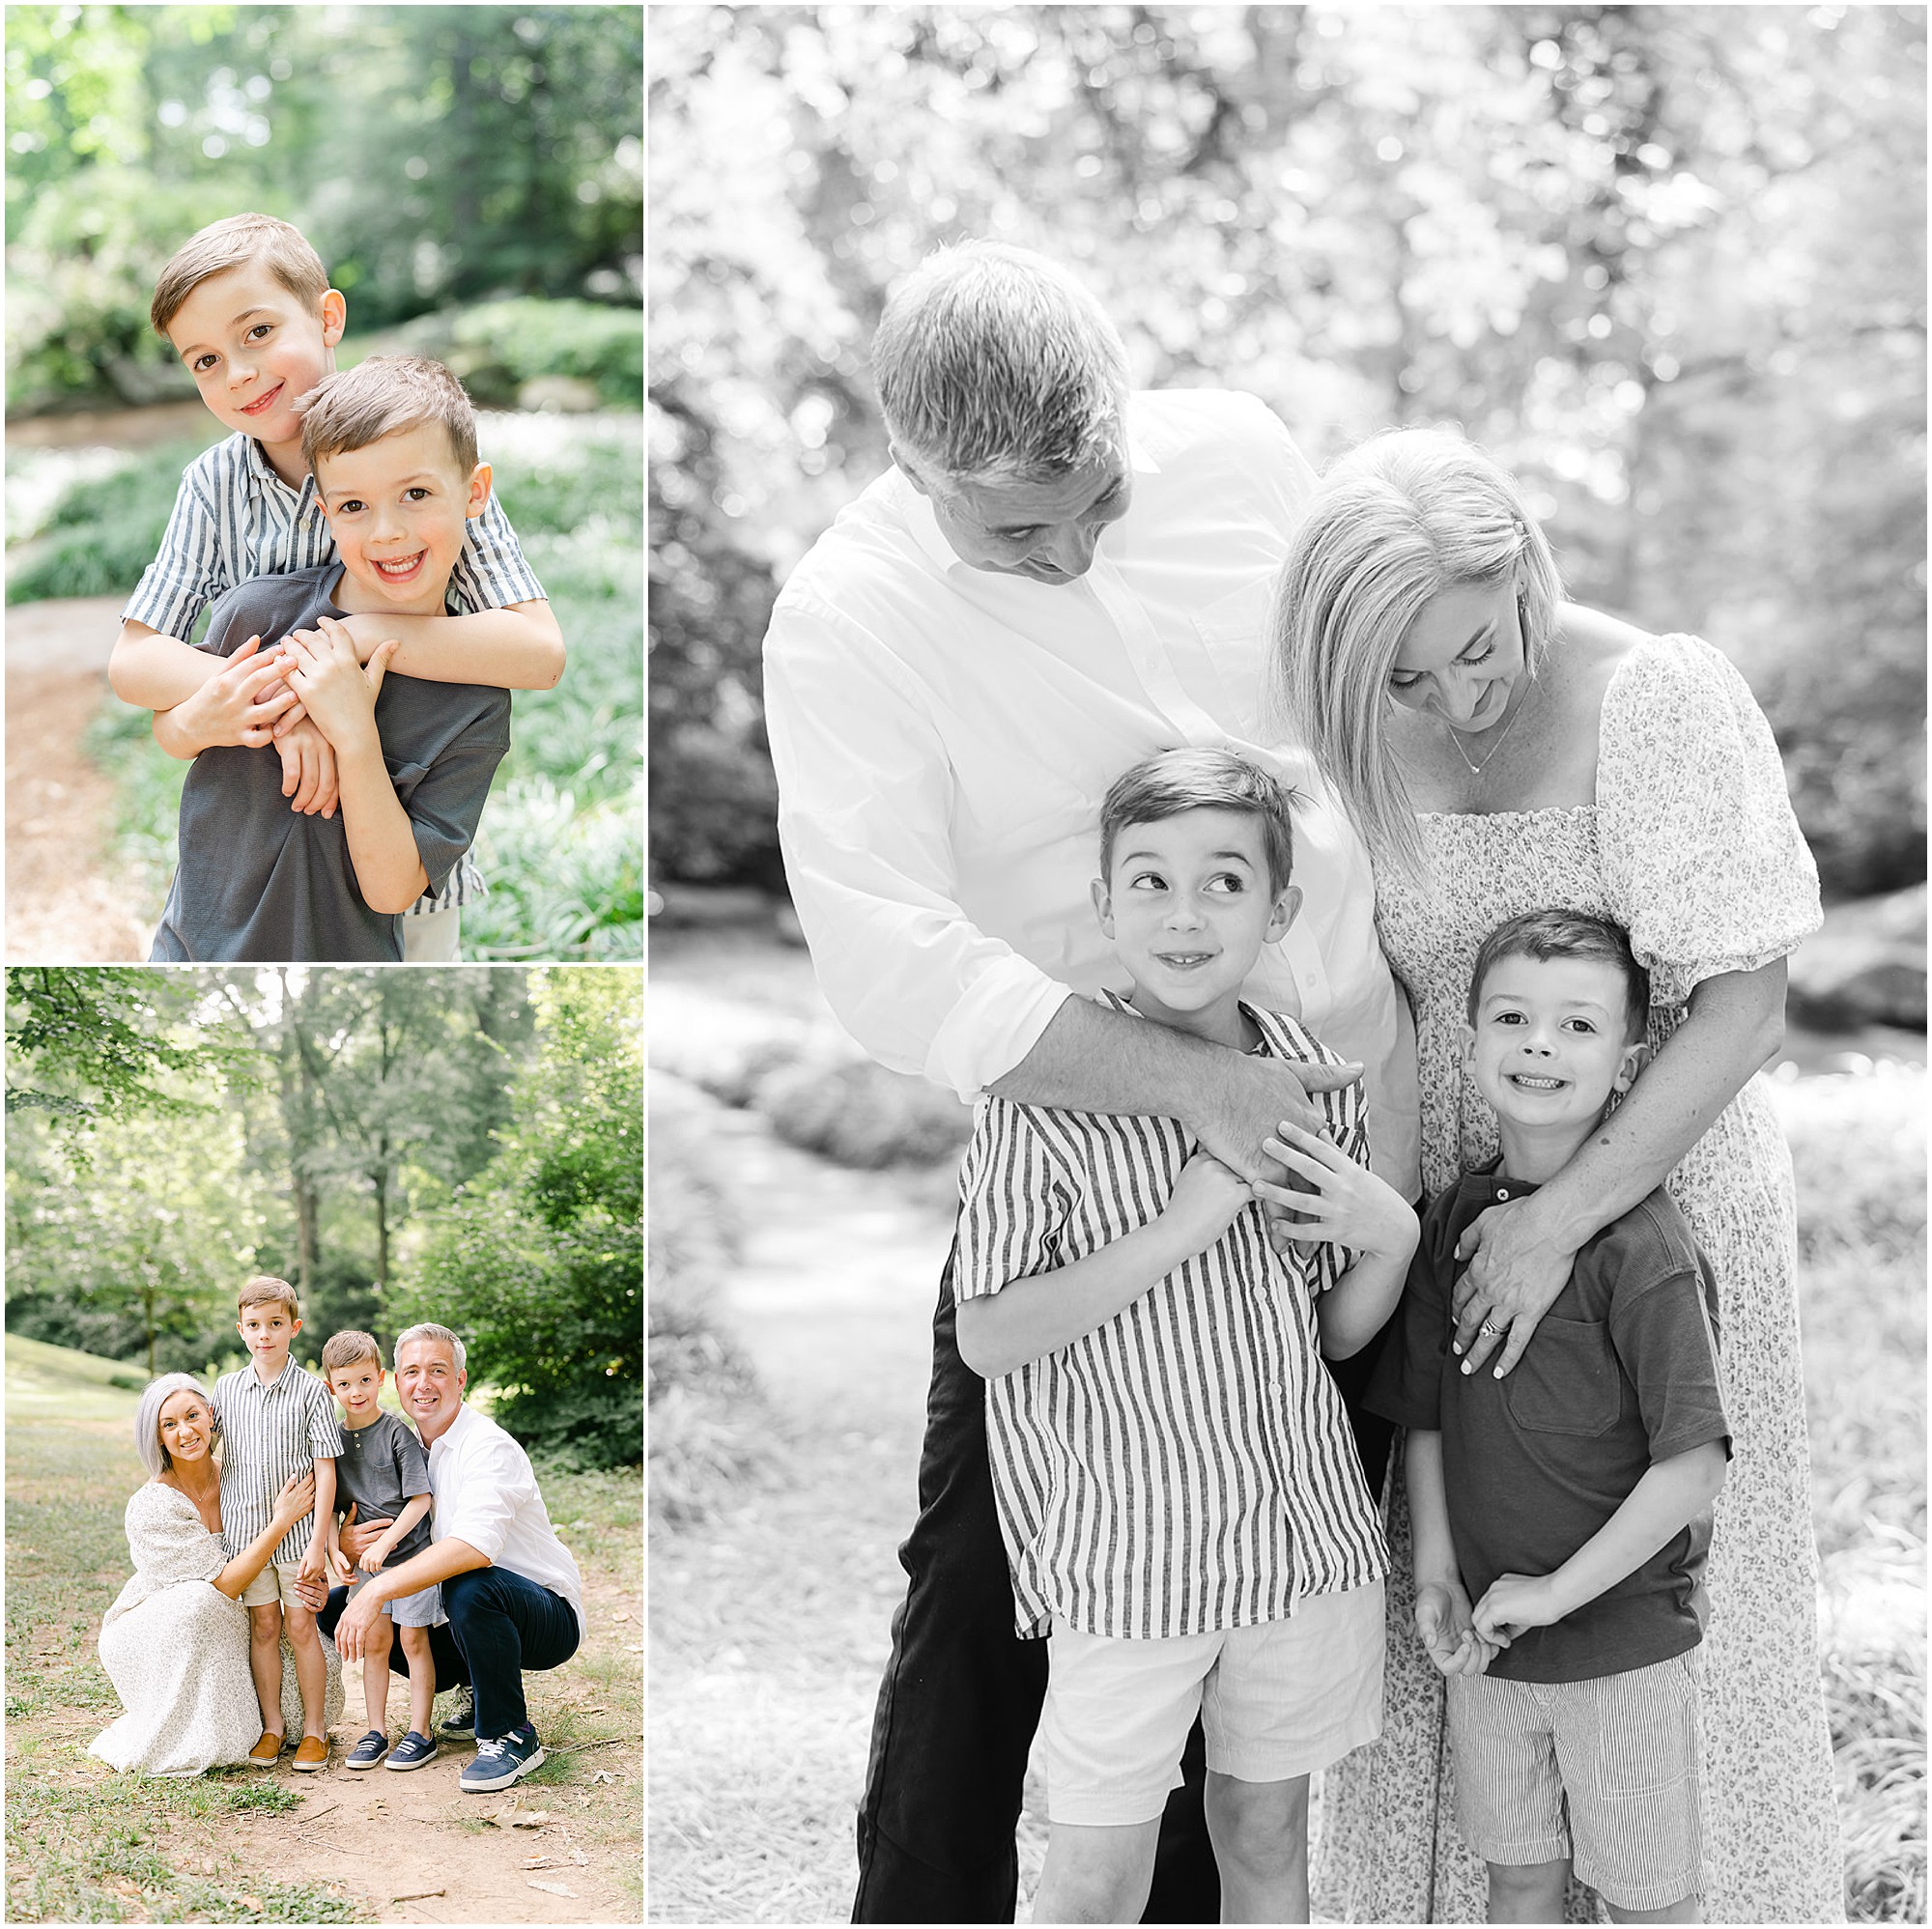 Portraits of a family with two young son at Winn Park in Atlanta.